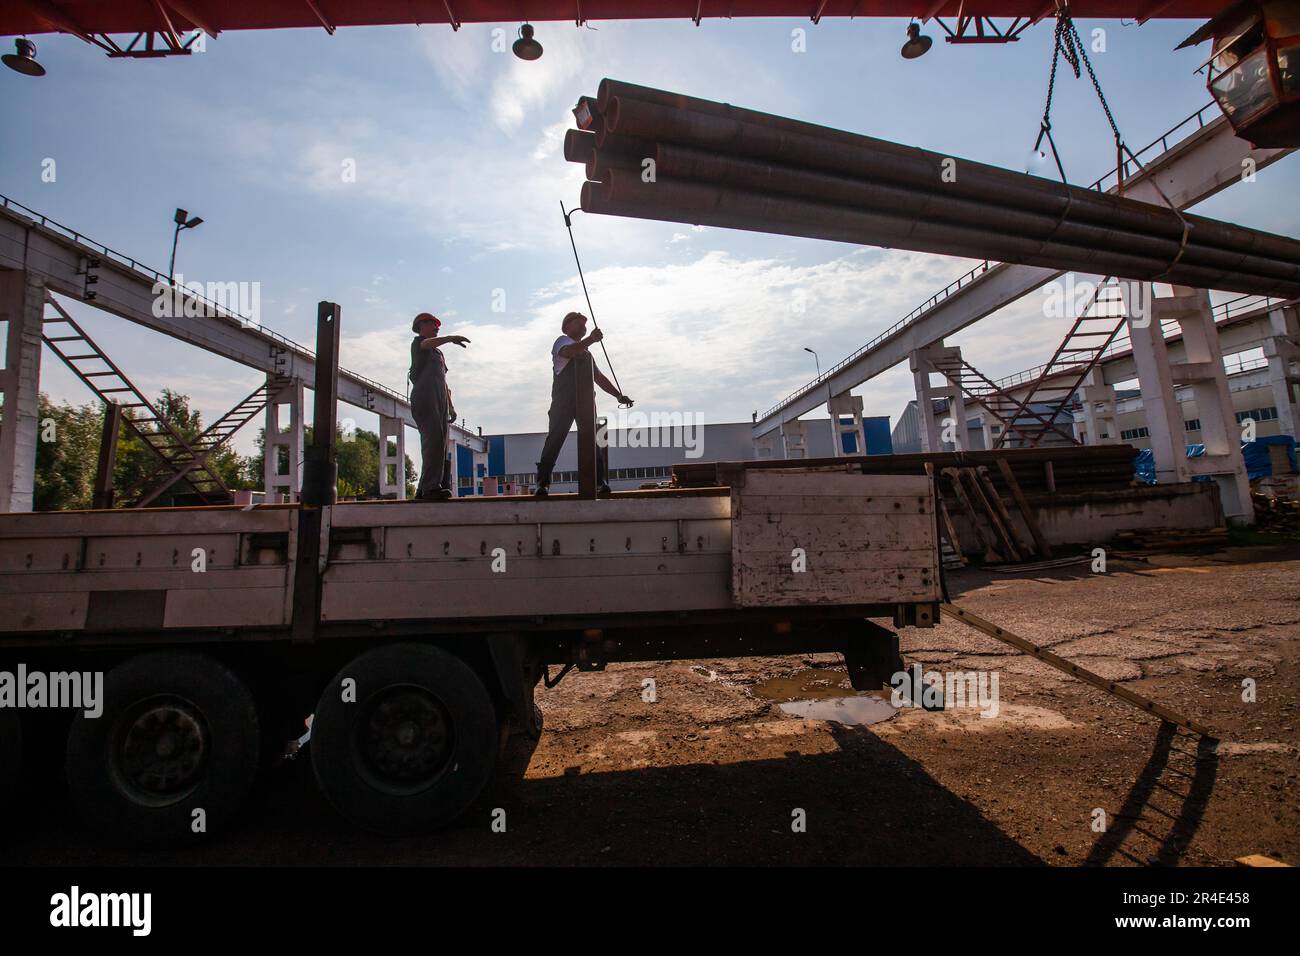 Podolsk, Moscow province - August 02, 2021: Pipes warehouse. Silhouettes of workers loading pipes with bridge crane Stock Photo